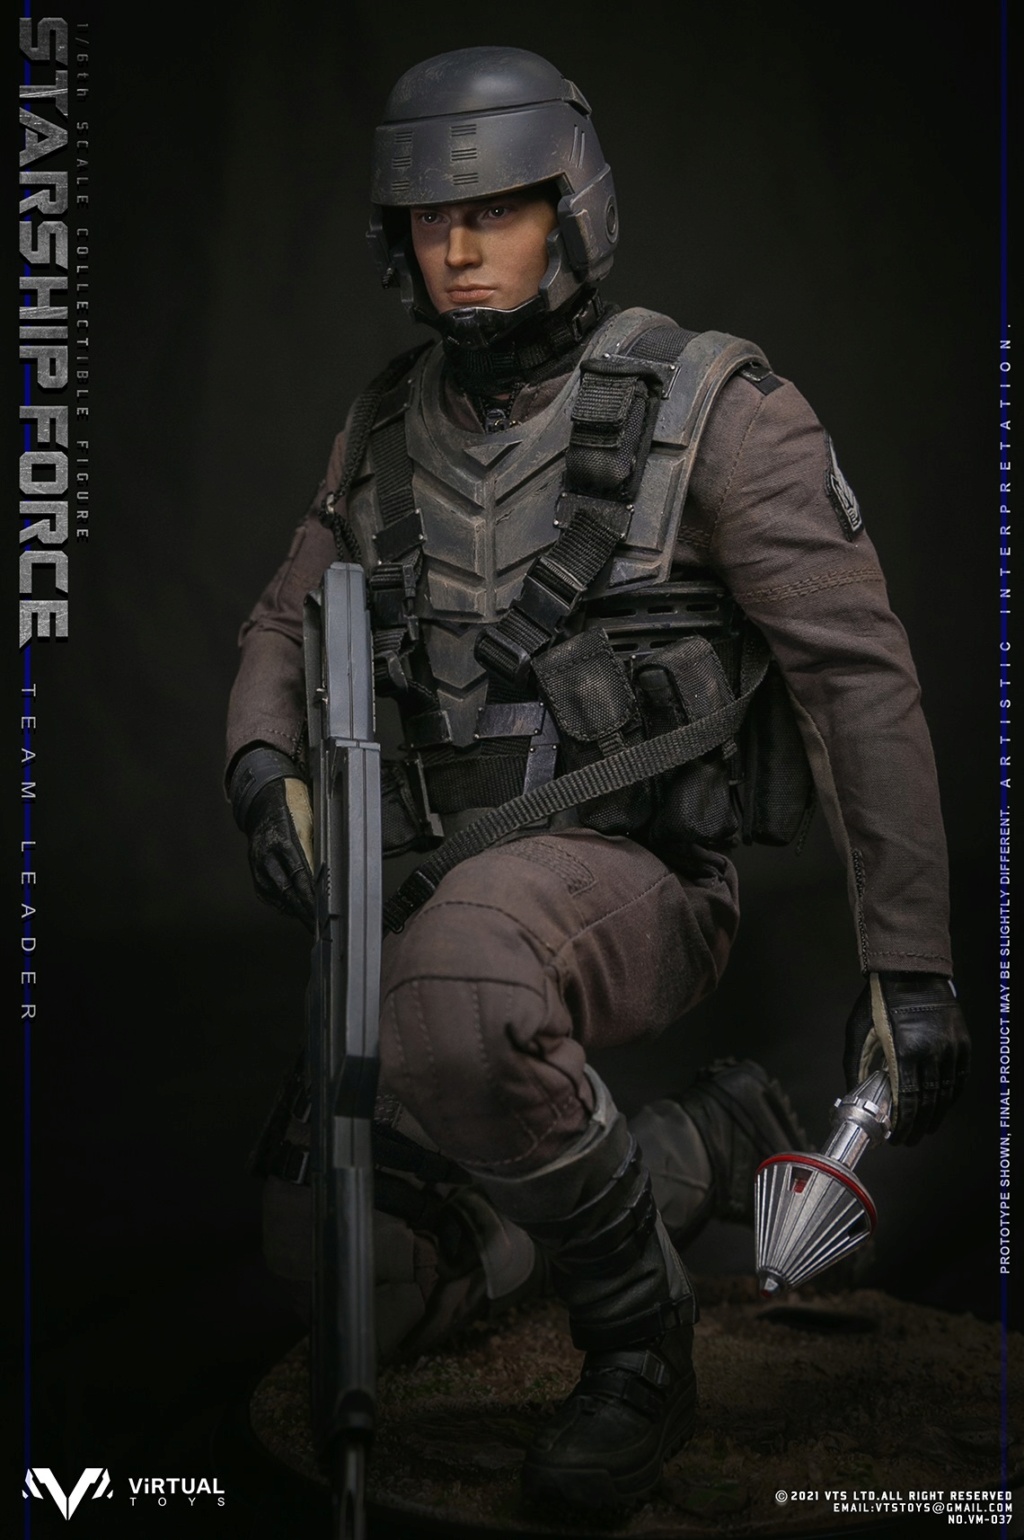 sci-fi - NEW PRODUCT: VTS VM037DX 1/6 Scale Starship Force-Team Leader Regular & Deluxe Version 15245510